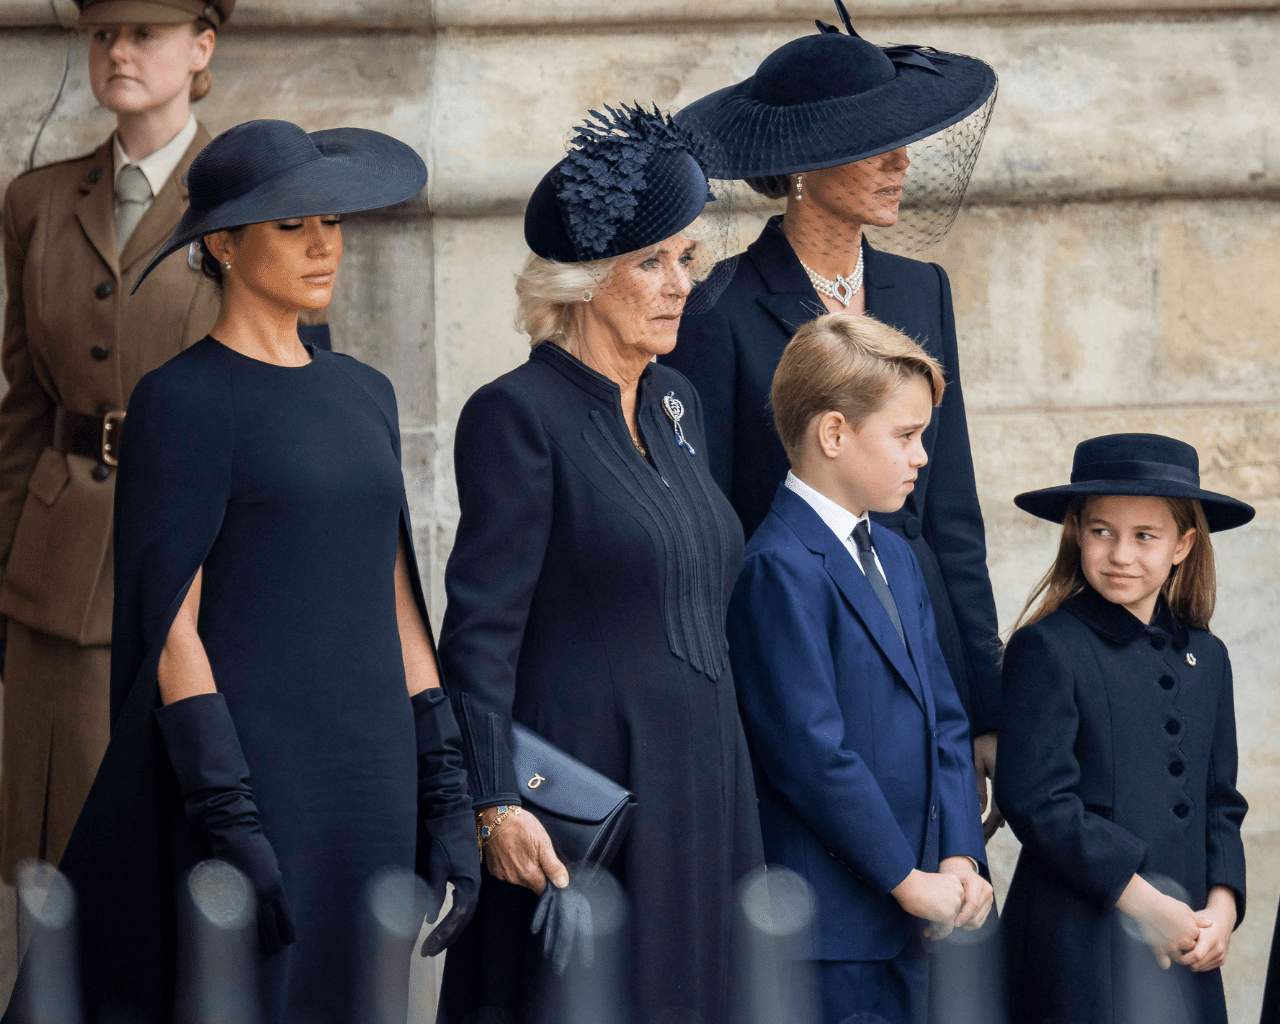 Meghan Markle Cries During Funeral Service For Queen Elizabeth II